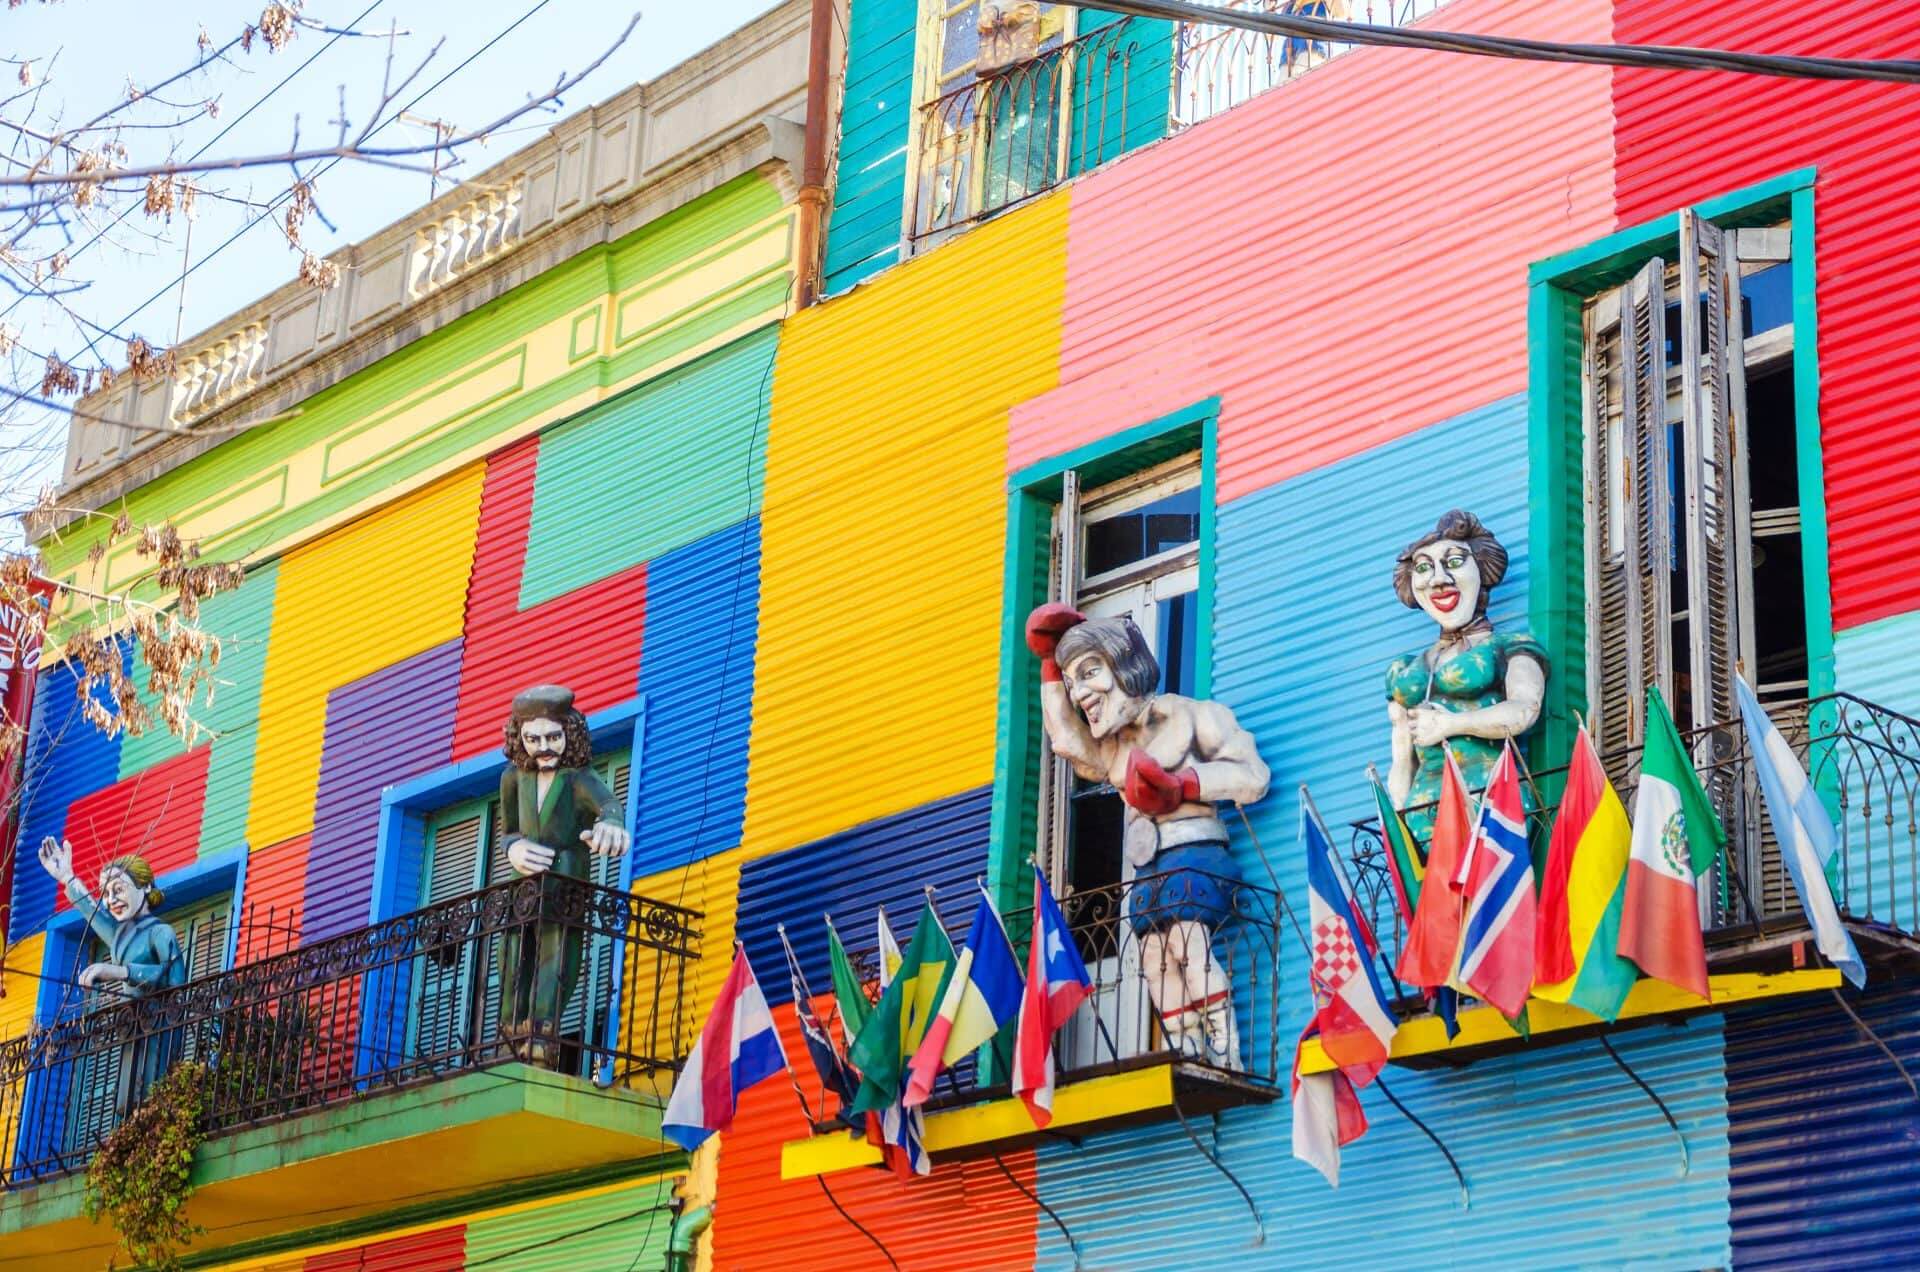 Argentinian district La Boca in Buenos Aires. There are bright buildings and figures outside